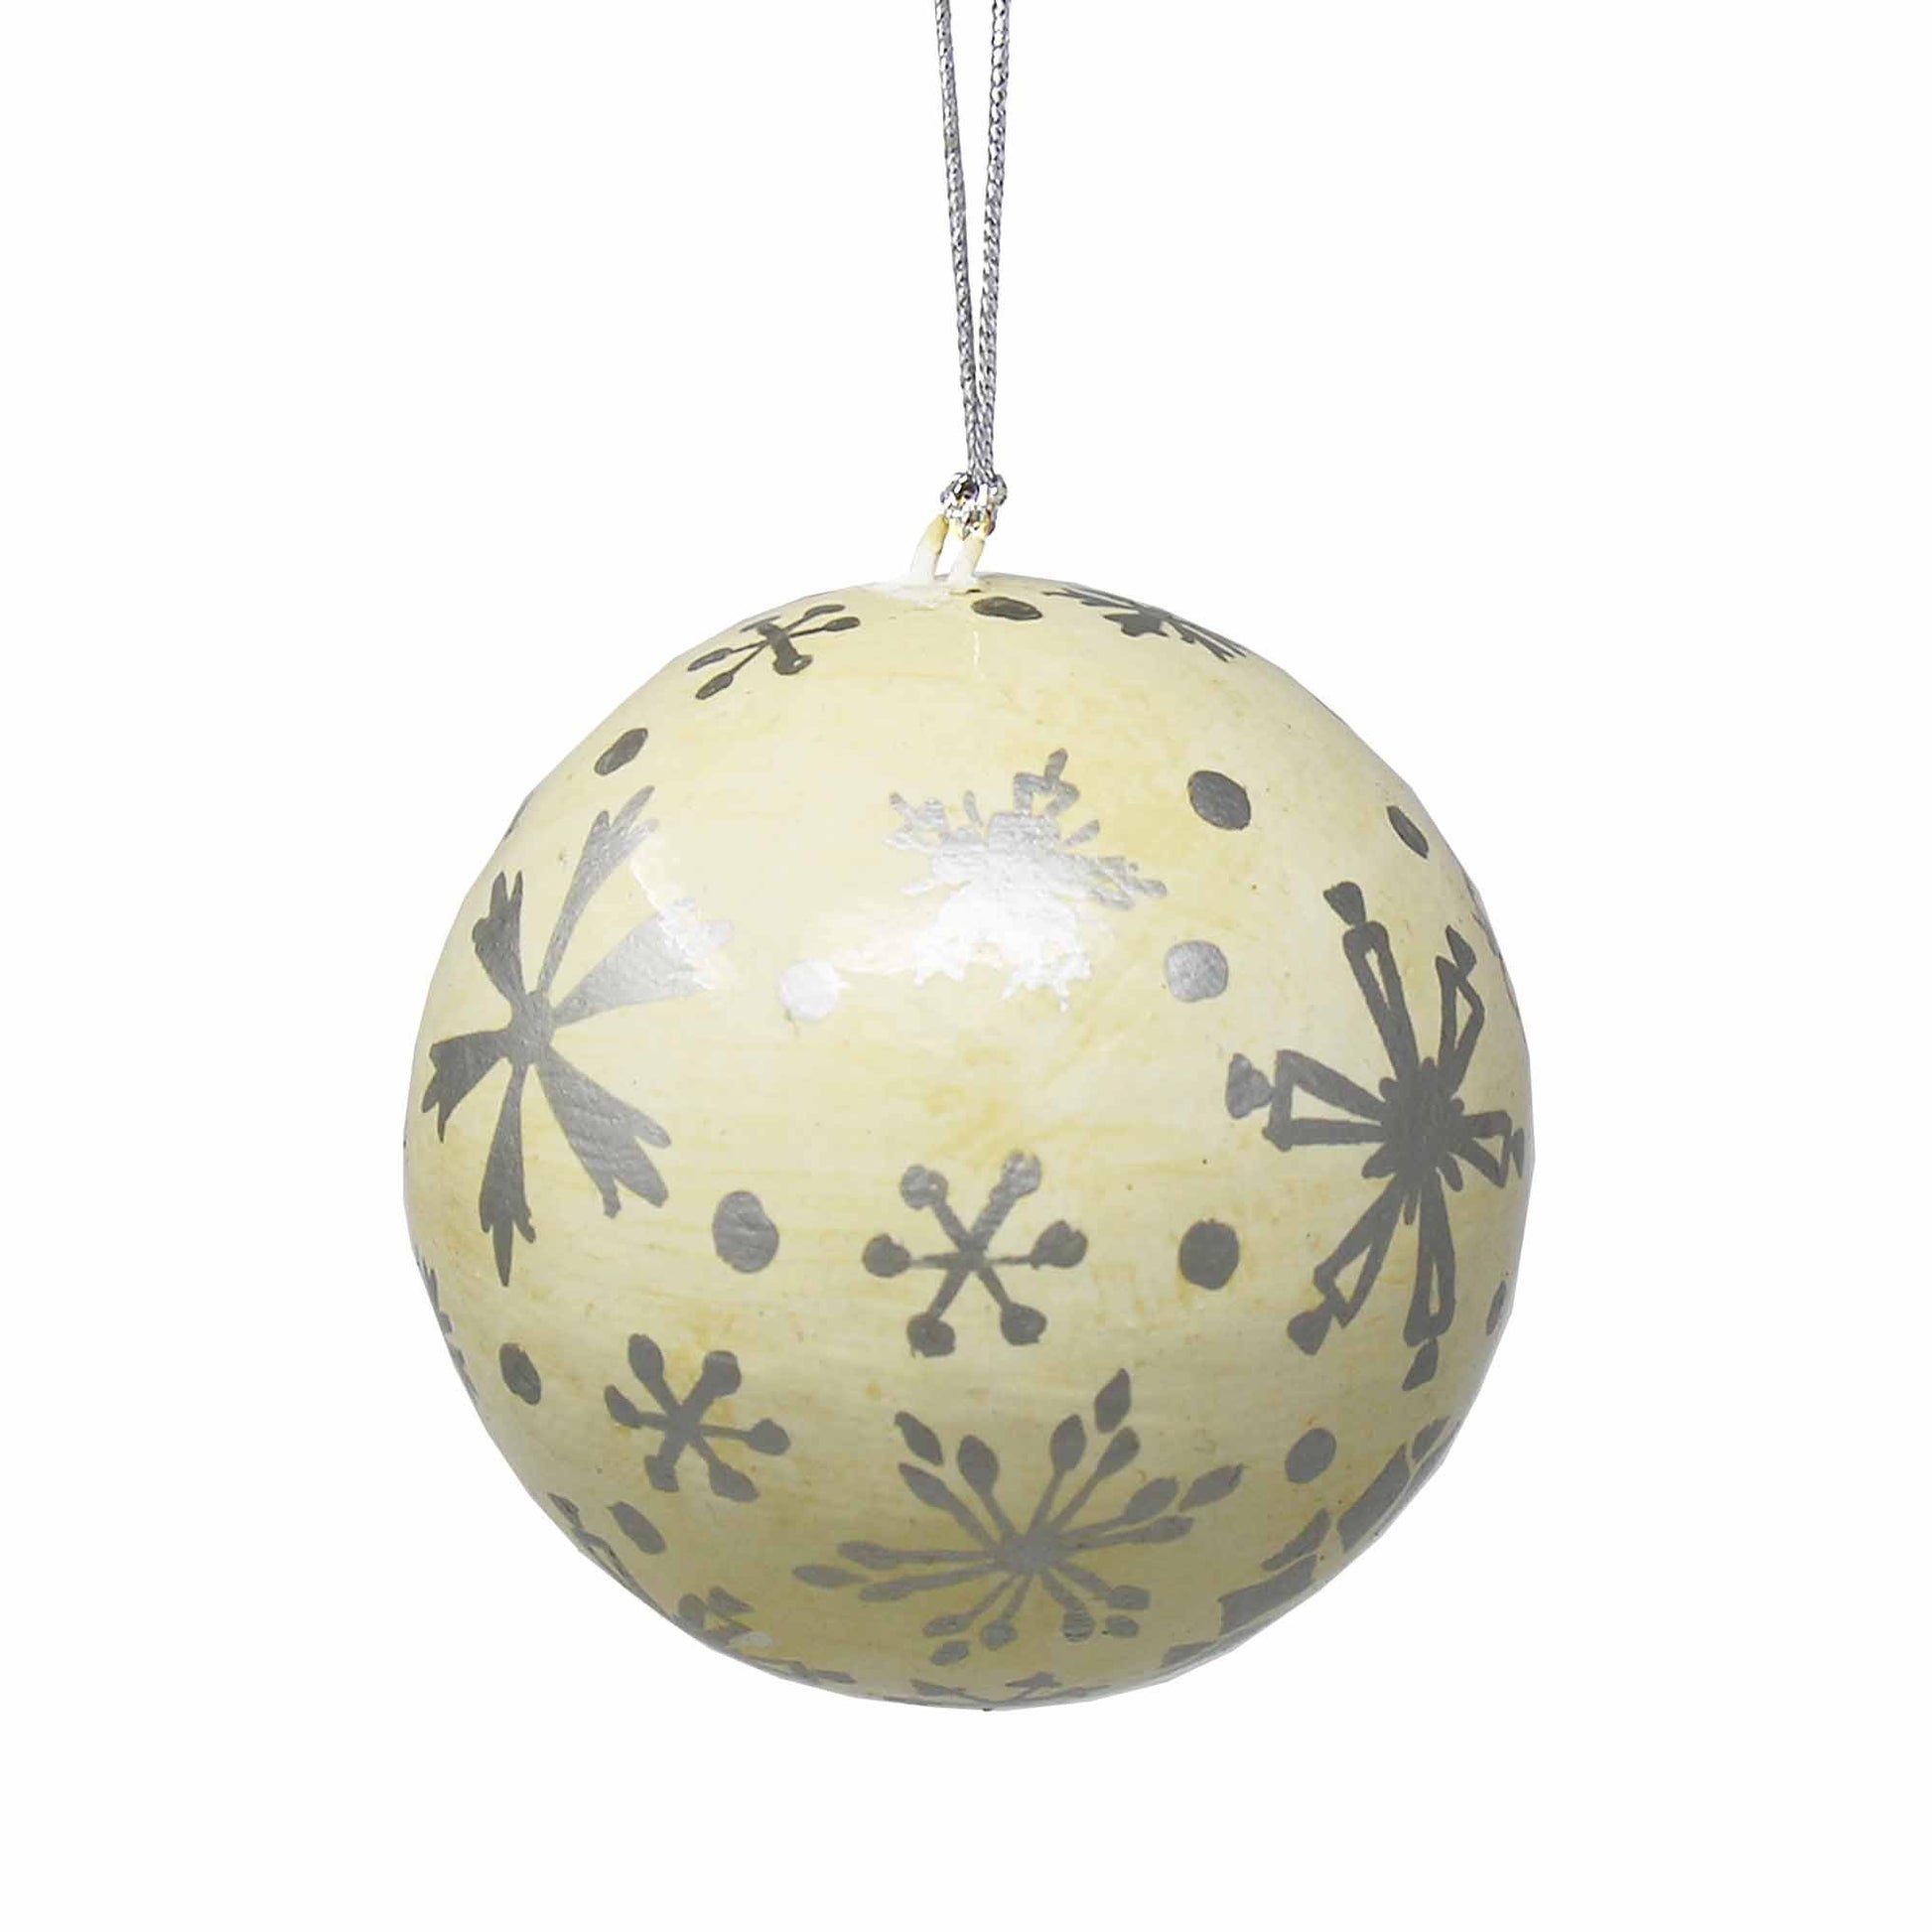 Handpainted Silver Snowflakes and Dots Papier Mache Hanging Ball Ornament - Linda Kay Gifford’s - Those Nasty Women TALK! by SWEETSurvivor